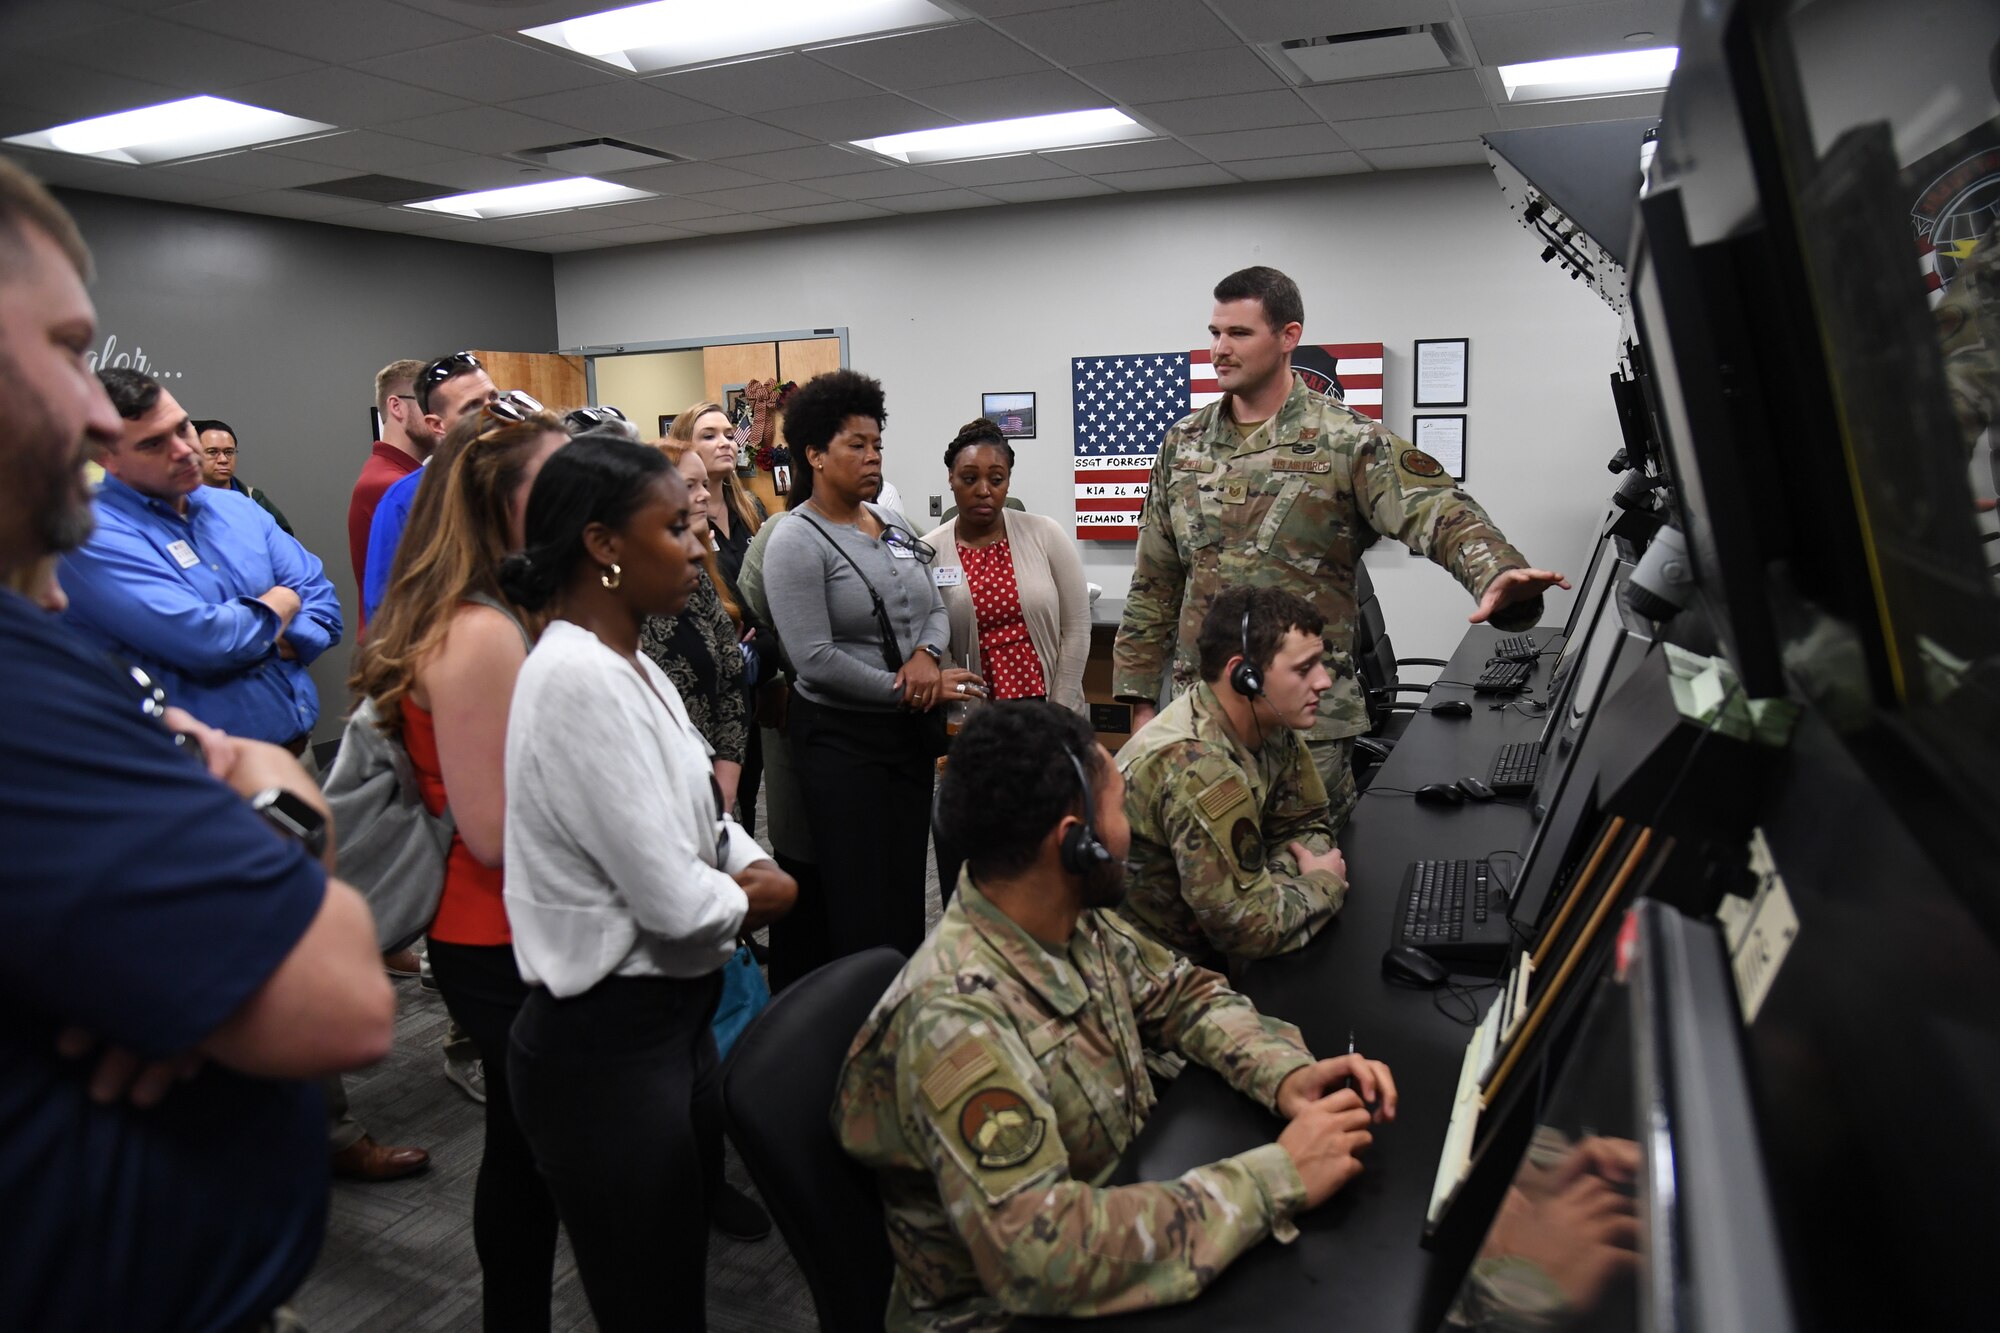 U.S. Air Force Tech. Sgt. Cody Boswell, 334th Training Squadron instructor, briefs members of the Mississippi Gulf Coast Chamber of Commerce Leadership Gulf Coast on the air traffic control training course inside Cody Hall at Keesler Air Force Base, Mississippi, Nov. 9, 2022.